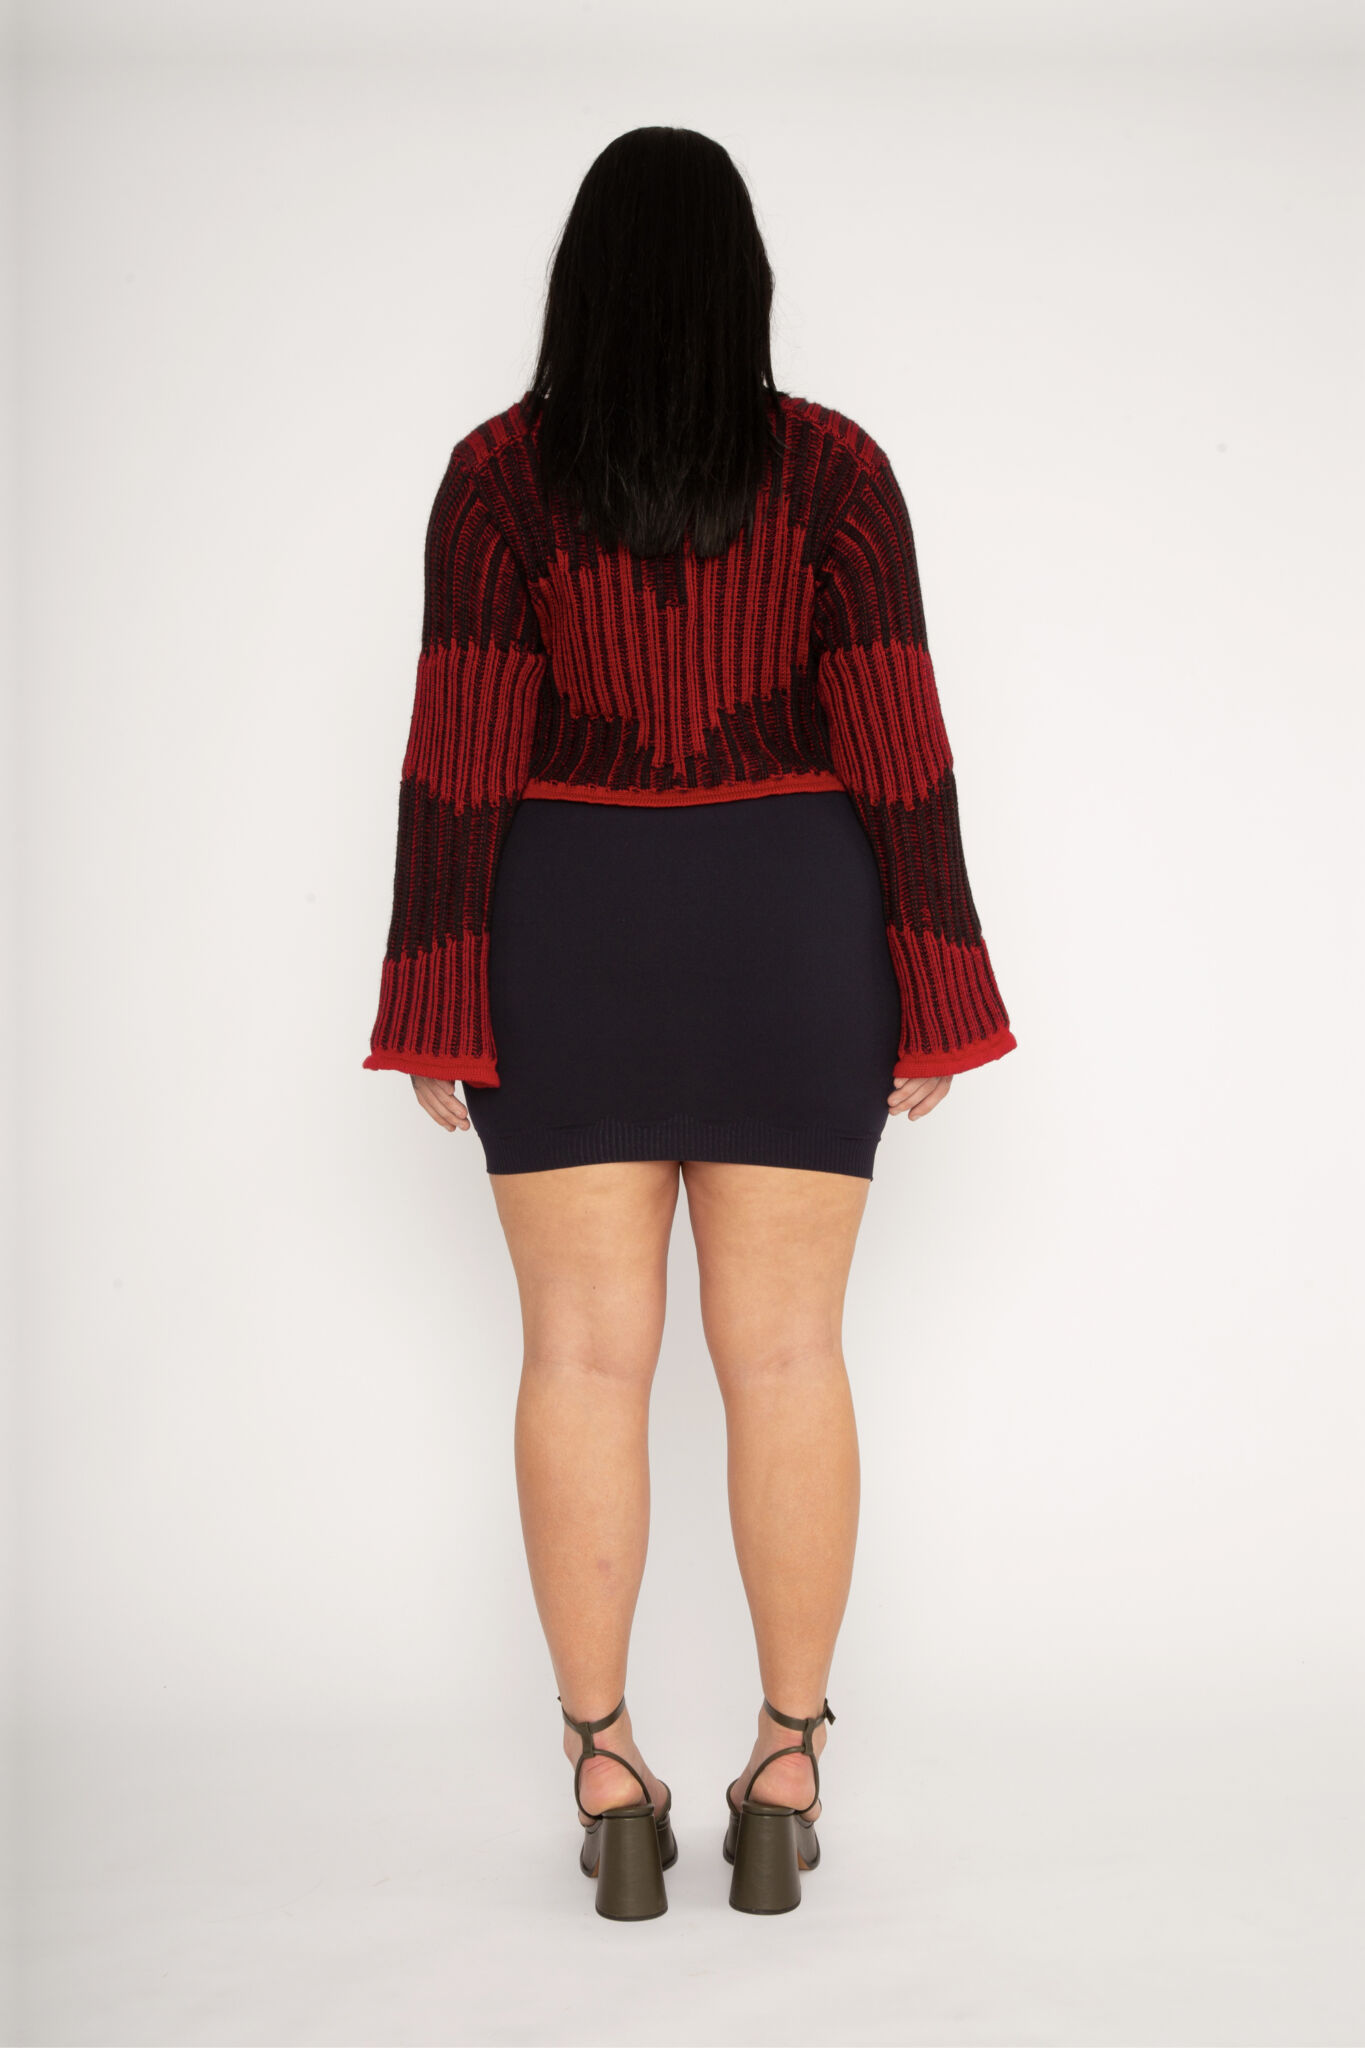 Wavy Wool Cardigan in red and black is a knitted cropped mohair cardigan with flared sleeves and all-over wavy stripes. Detailed with a heart in the back. The cardigan has a ribbed V-shaped neckline, a three-button closure and is cut for a slightly loose fit. The textile is fluffy, non-itchy and comfortable against the skin. The Wavy Wool Cardigan is also available in turquoise and comes in 3 different sizes.